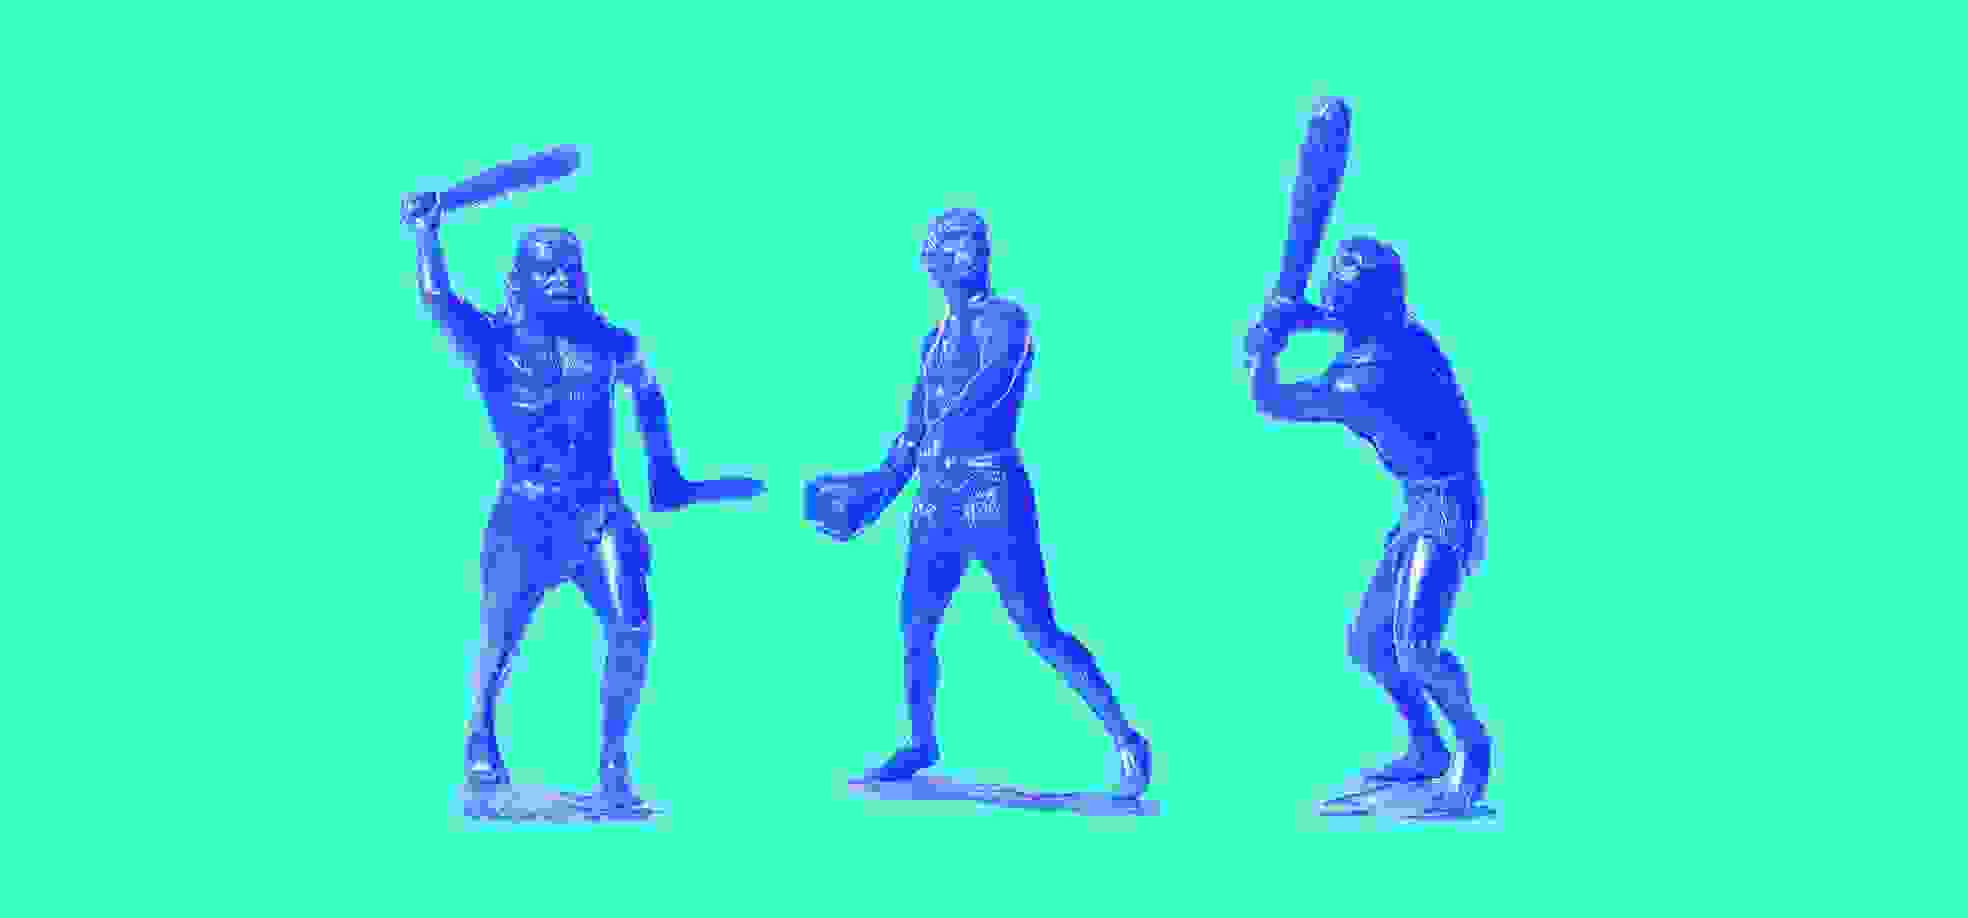 3 man form the Stone Age stands with a clubs in hands illustration